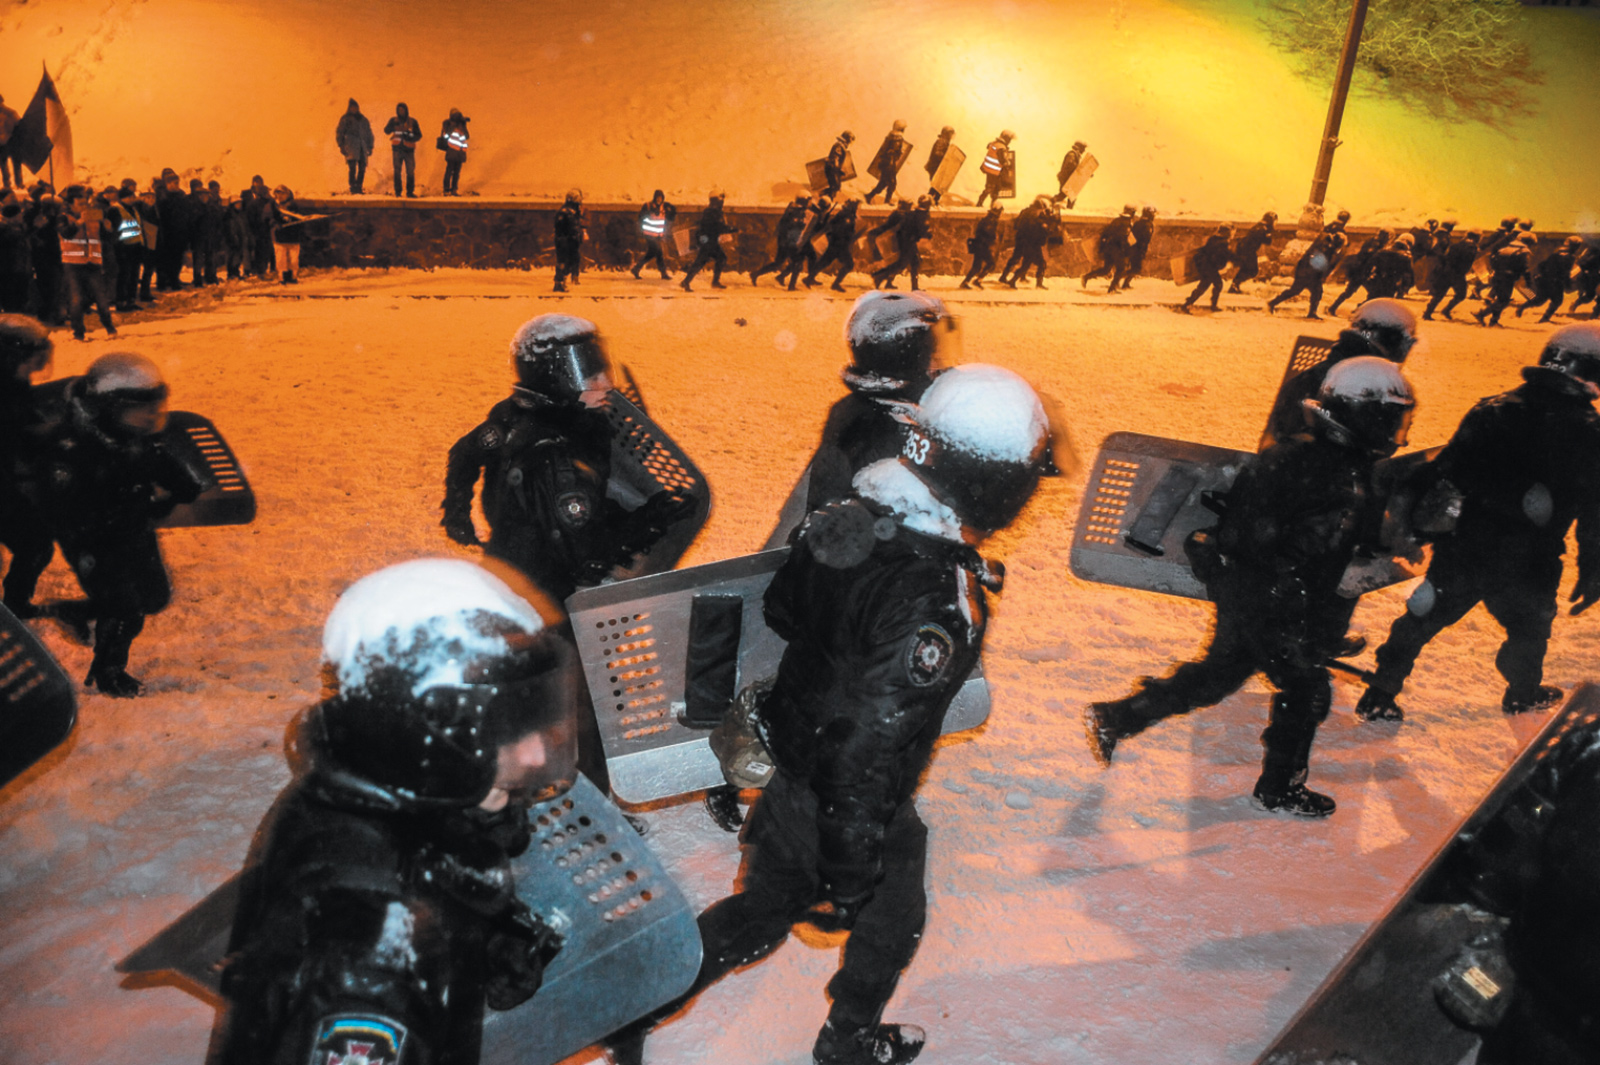 Riot police retreating after trying to push back protesters near the Cabinet of Ministers building during the Maidan protests in Kiev, December 2013